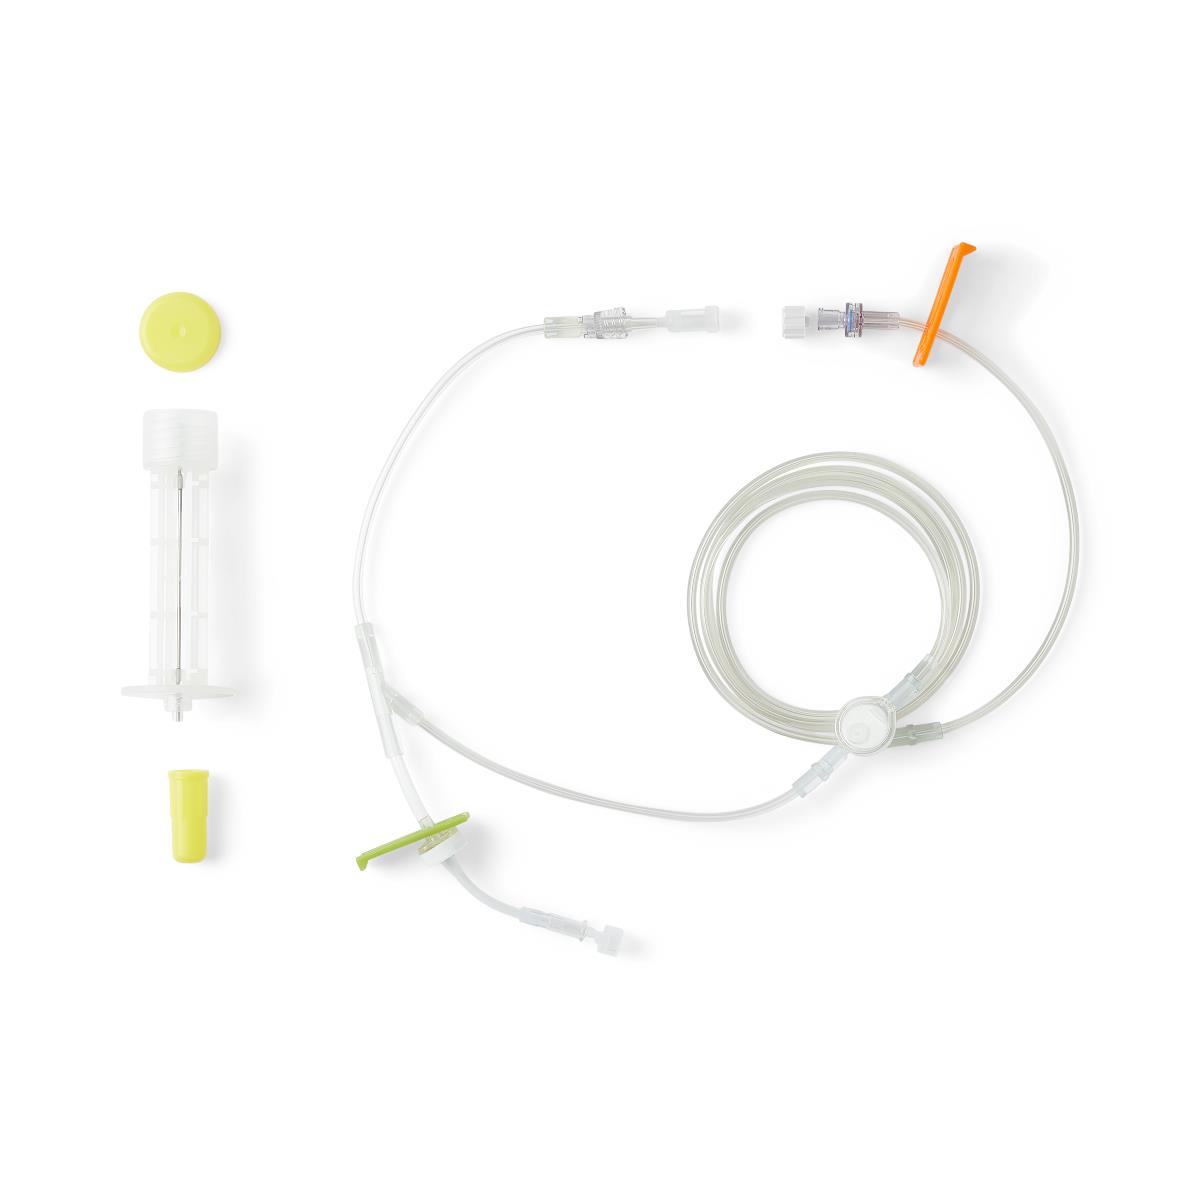 ICU Medical Anesthesia Extension Sets